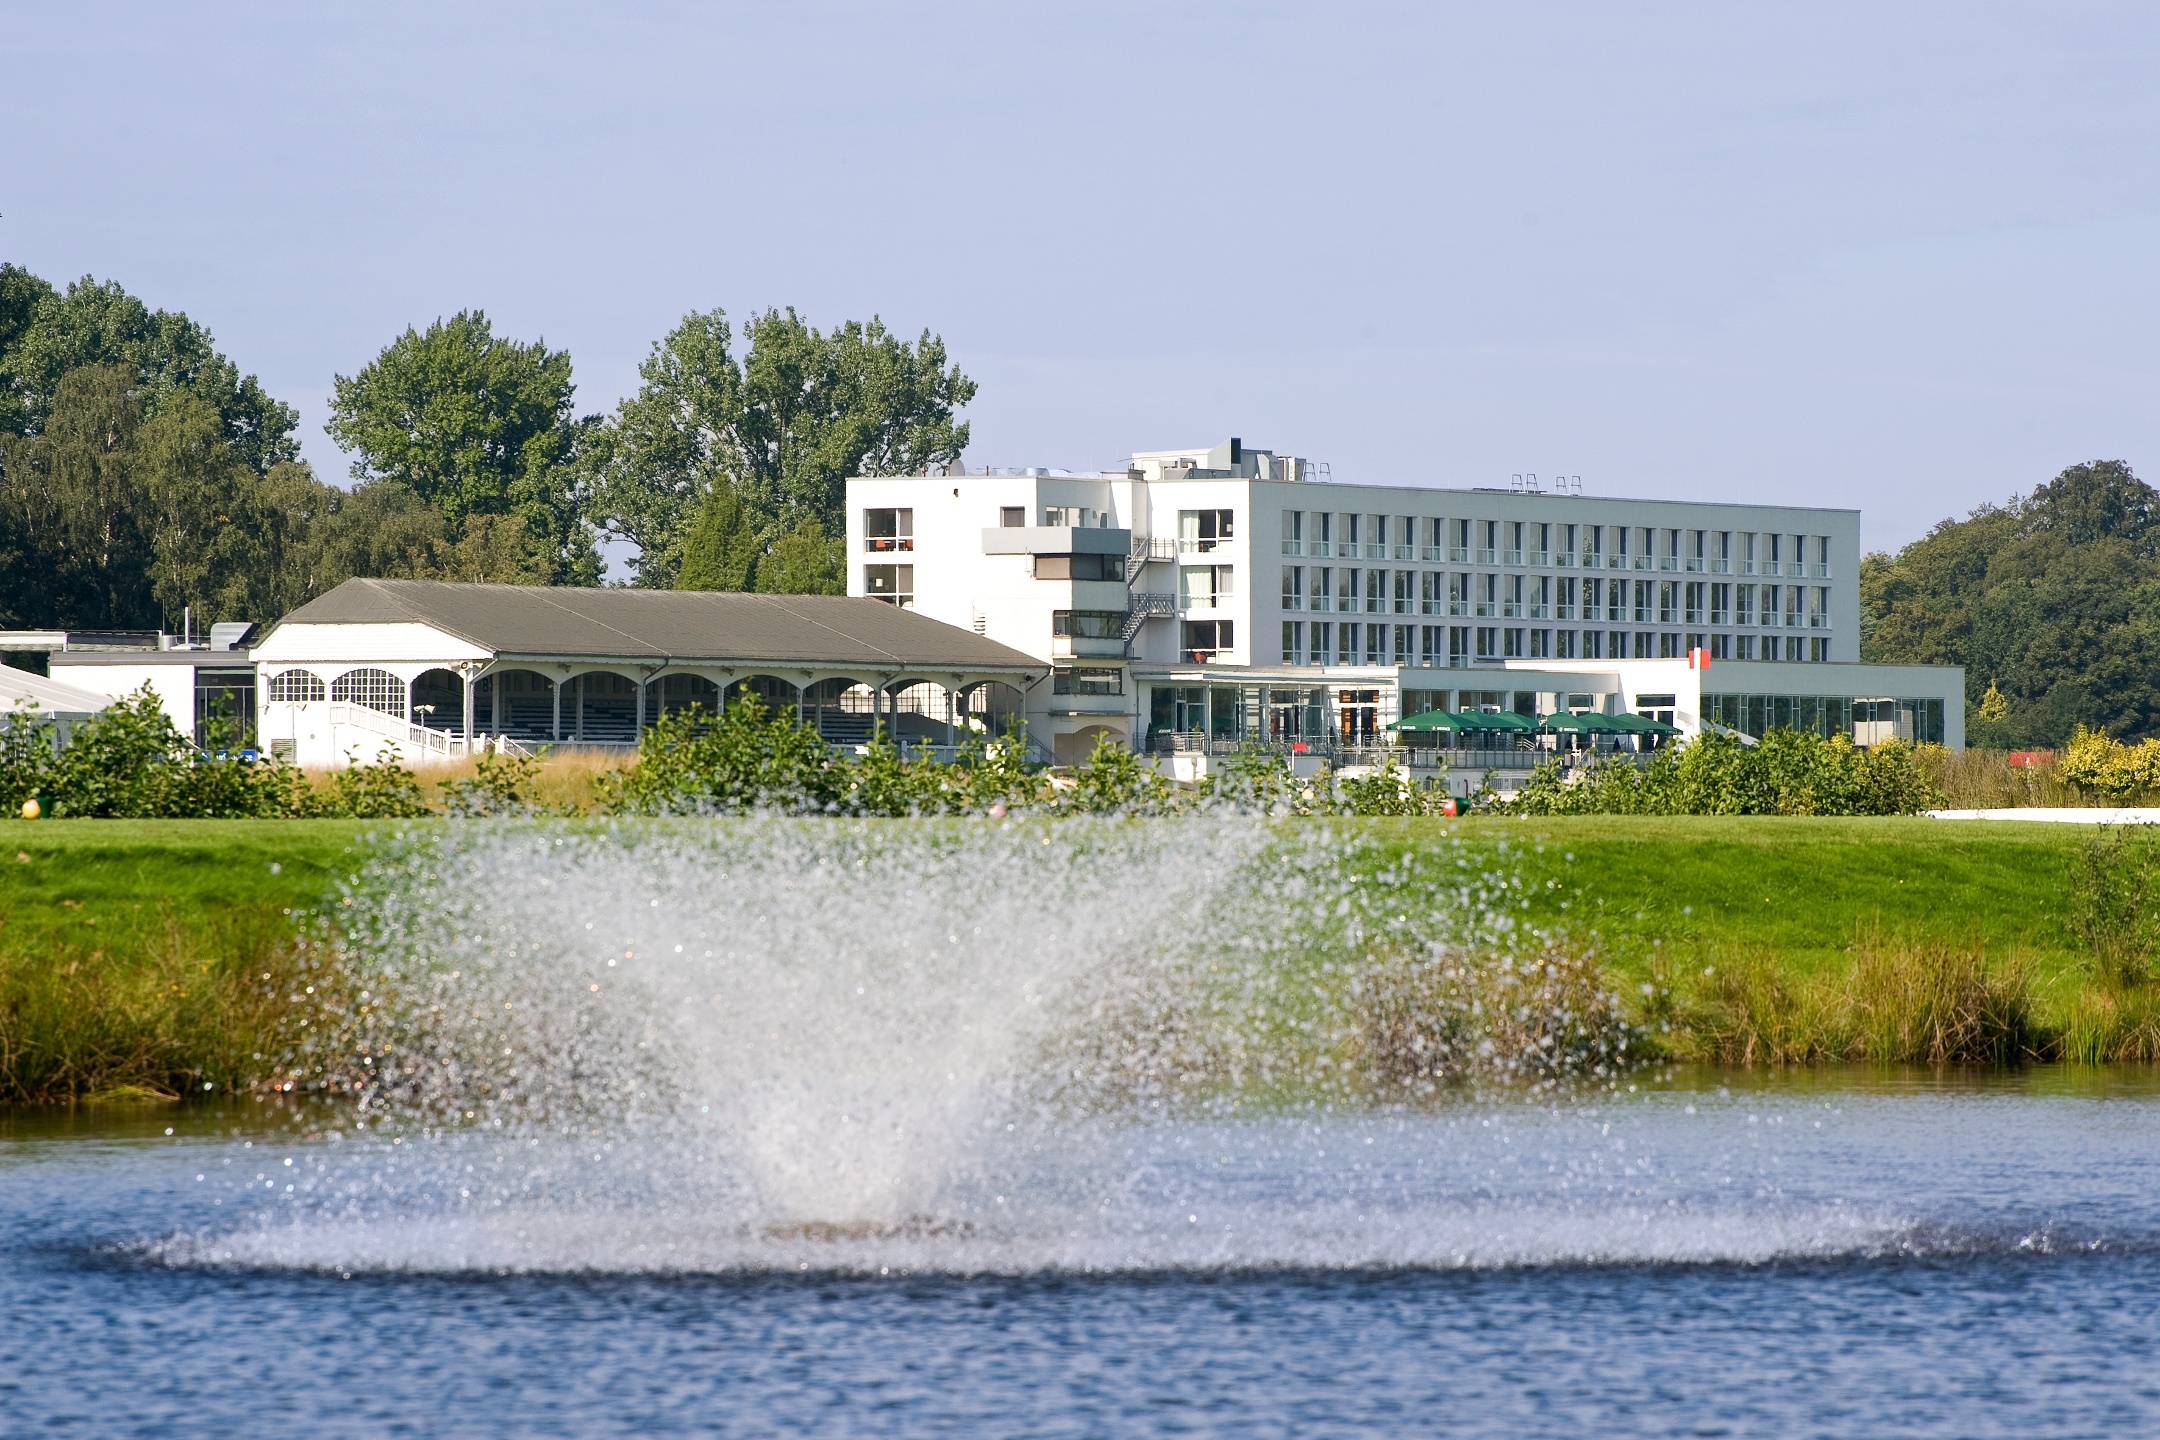 Water feature on the lake in front of the ATLANTIC Hotel Galopprennbahn in Bremen